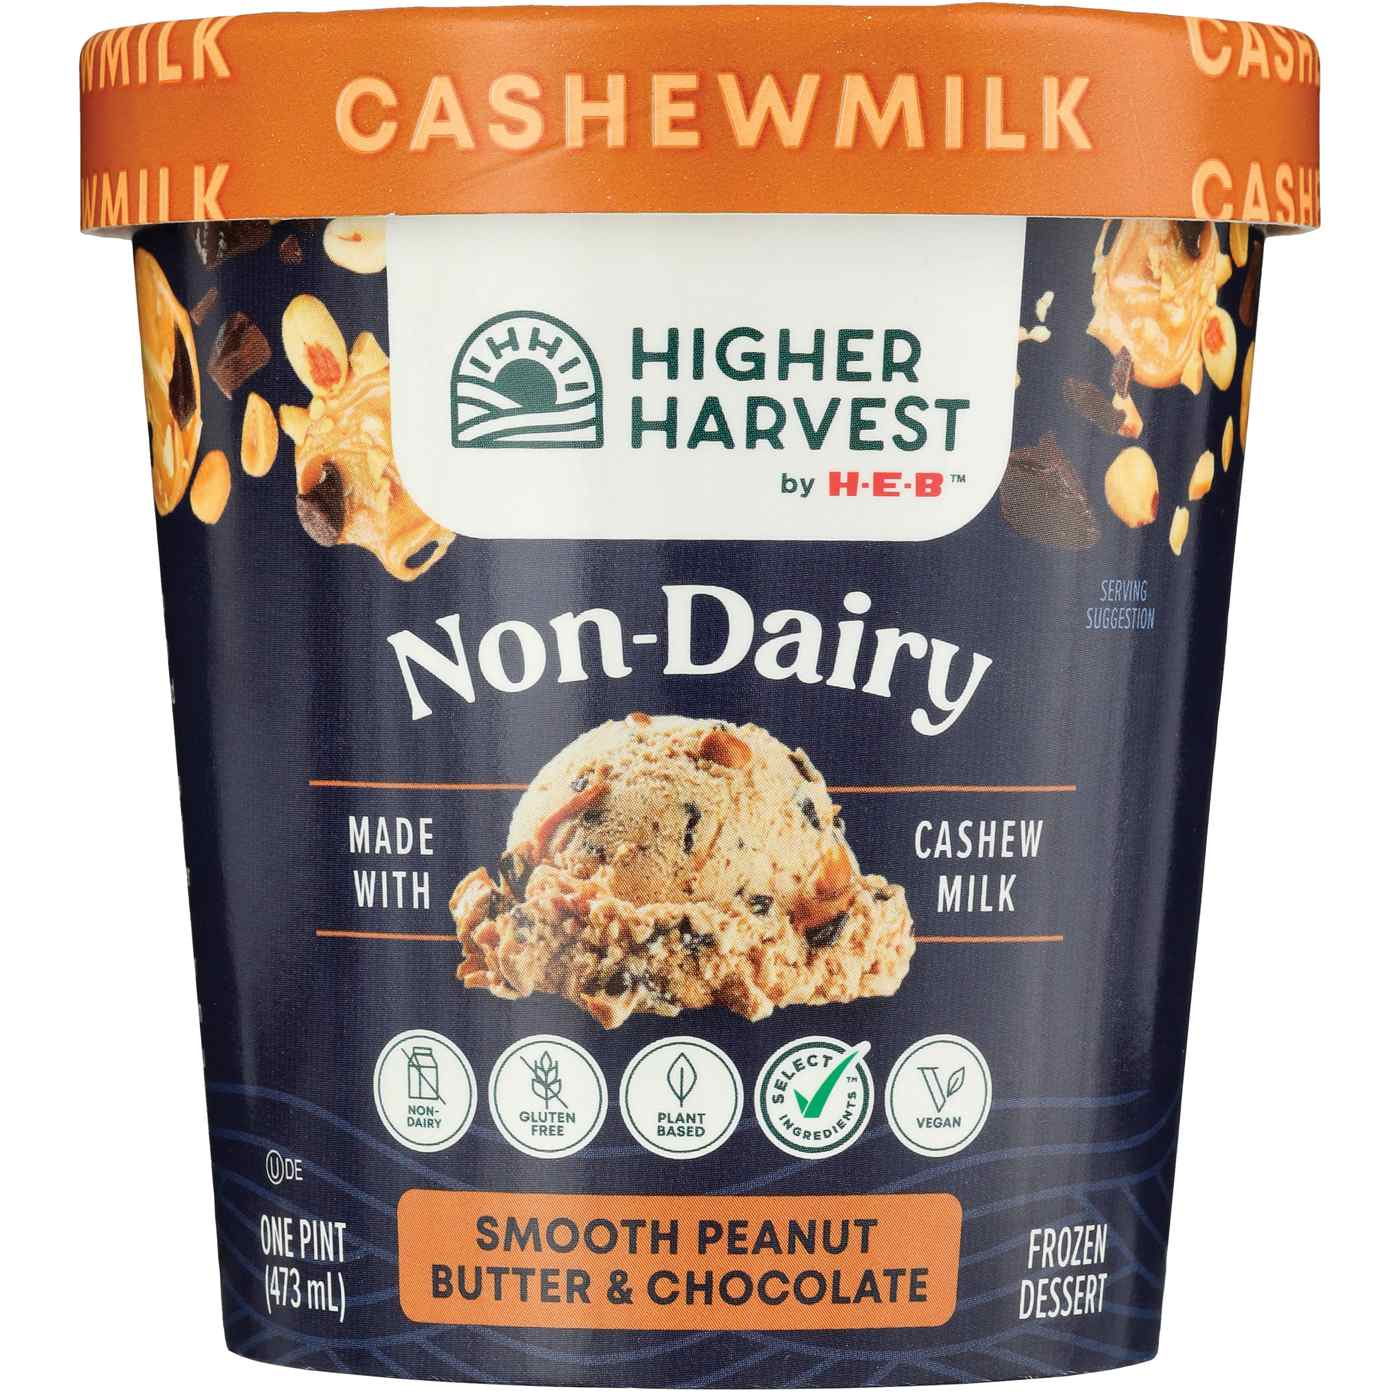 Higher Harvest by H-E-B Non-Dairy Frozen Dessert - Smooth Peanut Butter & Chocolate; image 2 of 2